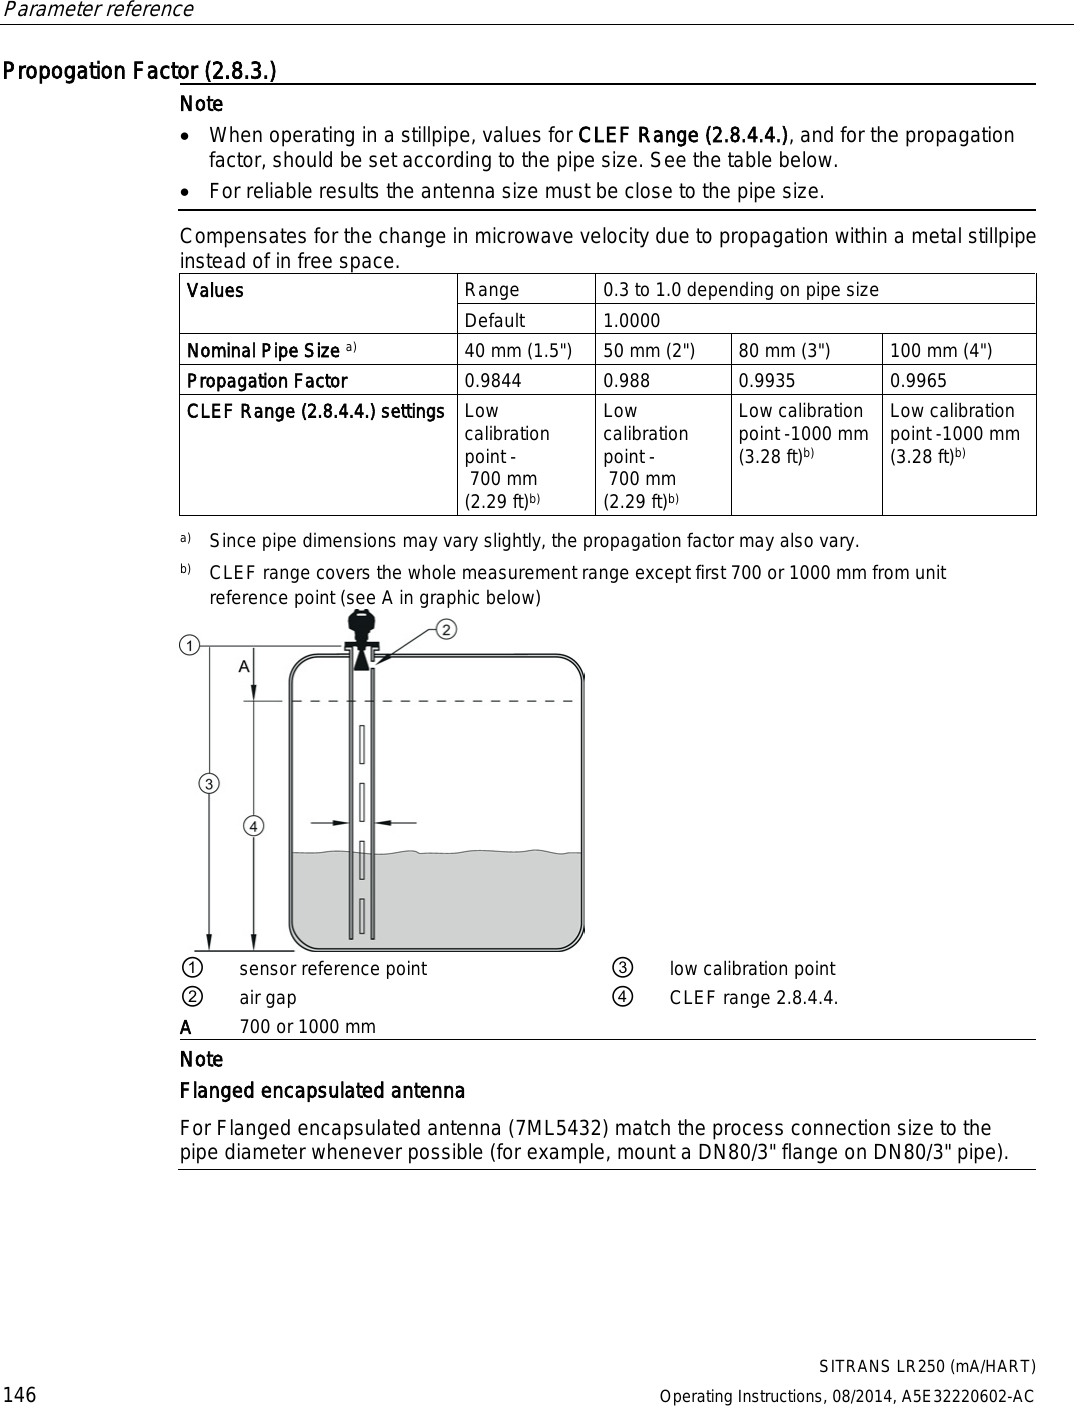 Parameter reference    SITRANS LR250 (mA/HART) 146 Operating Instructions, 08/2014, A5E32220602-AC Propogation Factor (2.8.3.)  Note • When operating in a stillpipe, values for CLEF Range (2.8.4.4.), and for the propagation factor, should be set according to the pipe size. See the table below. • For reliable results the antenna size must be close to the pipe size. Compensates for the change in microwave velocity due to propagation within a metal stillpipe instead of in free space. Values Range 0.3 to 1.0 depending on pipe size Default 1.0000 Nominal Pipe Size a) 40 mm (1.5&quot;) 50 mm (2&quot;) 80 mm (3&quot;) 100 mm (4&quot;) Propagation Factor 0.9844 0.988 0.9935 0.9965 CLEF Range (2.8.4.4.) settings Low calibration point - 700 mm (2.29 ft)b) Low calibration point - 700 mm (2.29 ft)b) Low calibration point -1000 mm (3.28 ft)b) Low calibration point -1000 mm (3.28 ft)b)  a) Since pipe dimensions may vary slightly, the propagation factor may also vary. b) CLEF range covers the whole measurement range except first 700 or 1000 mm from unit reference point (see A in graphic below)  ① sensor reference point ③ low calibration point ② air gap ④ CLEF range 2.8.4.4. A 700 or 1000 mm  Note Flanged encapsulated antenna For Flanged encapsulated antenna (7ML5432) match the process connection size to the pipe diameter whenever possible (for example, mount a DN80/3&quot; flange on DN80/3&quot; pipe). 